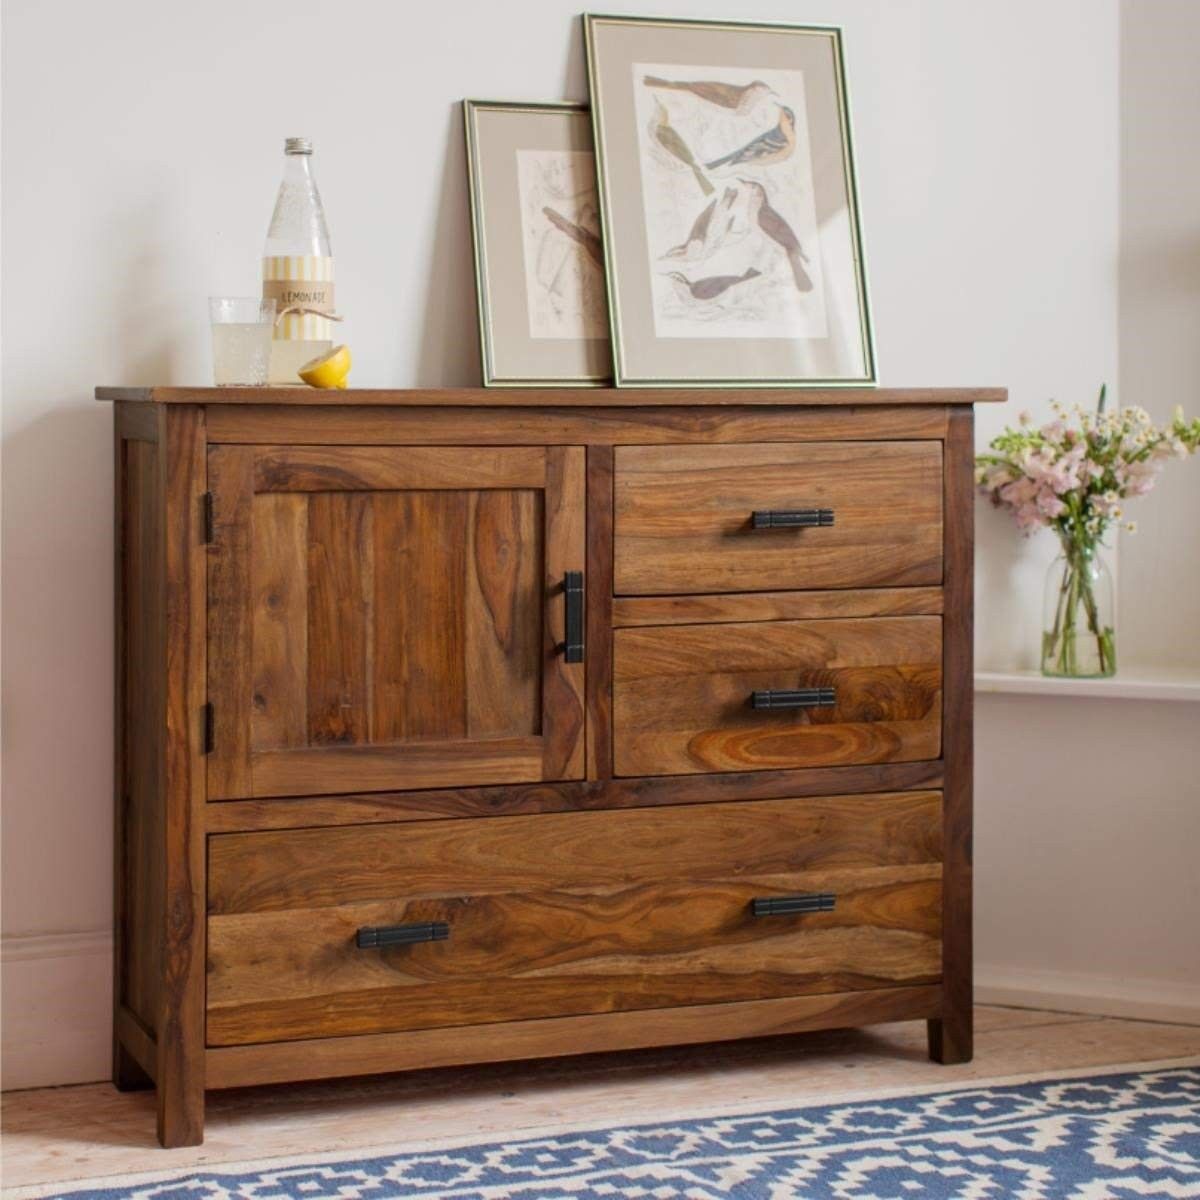 Jett Sheesham Wood Sideboard Cabinet For Living Room Furniture 3 Drawers 1 Cabinet  Storage Natural Honey Finish – Shagun Arts Regarding Wood Cabinet With Drawers (View 8 of 15)